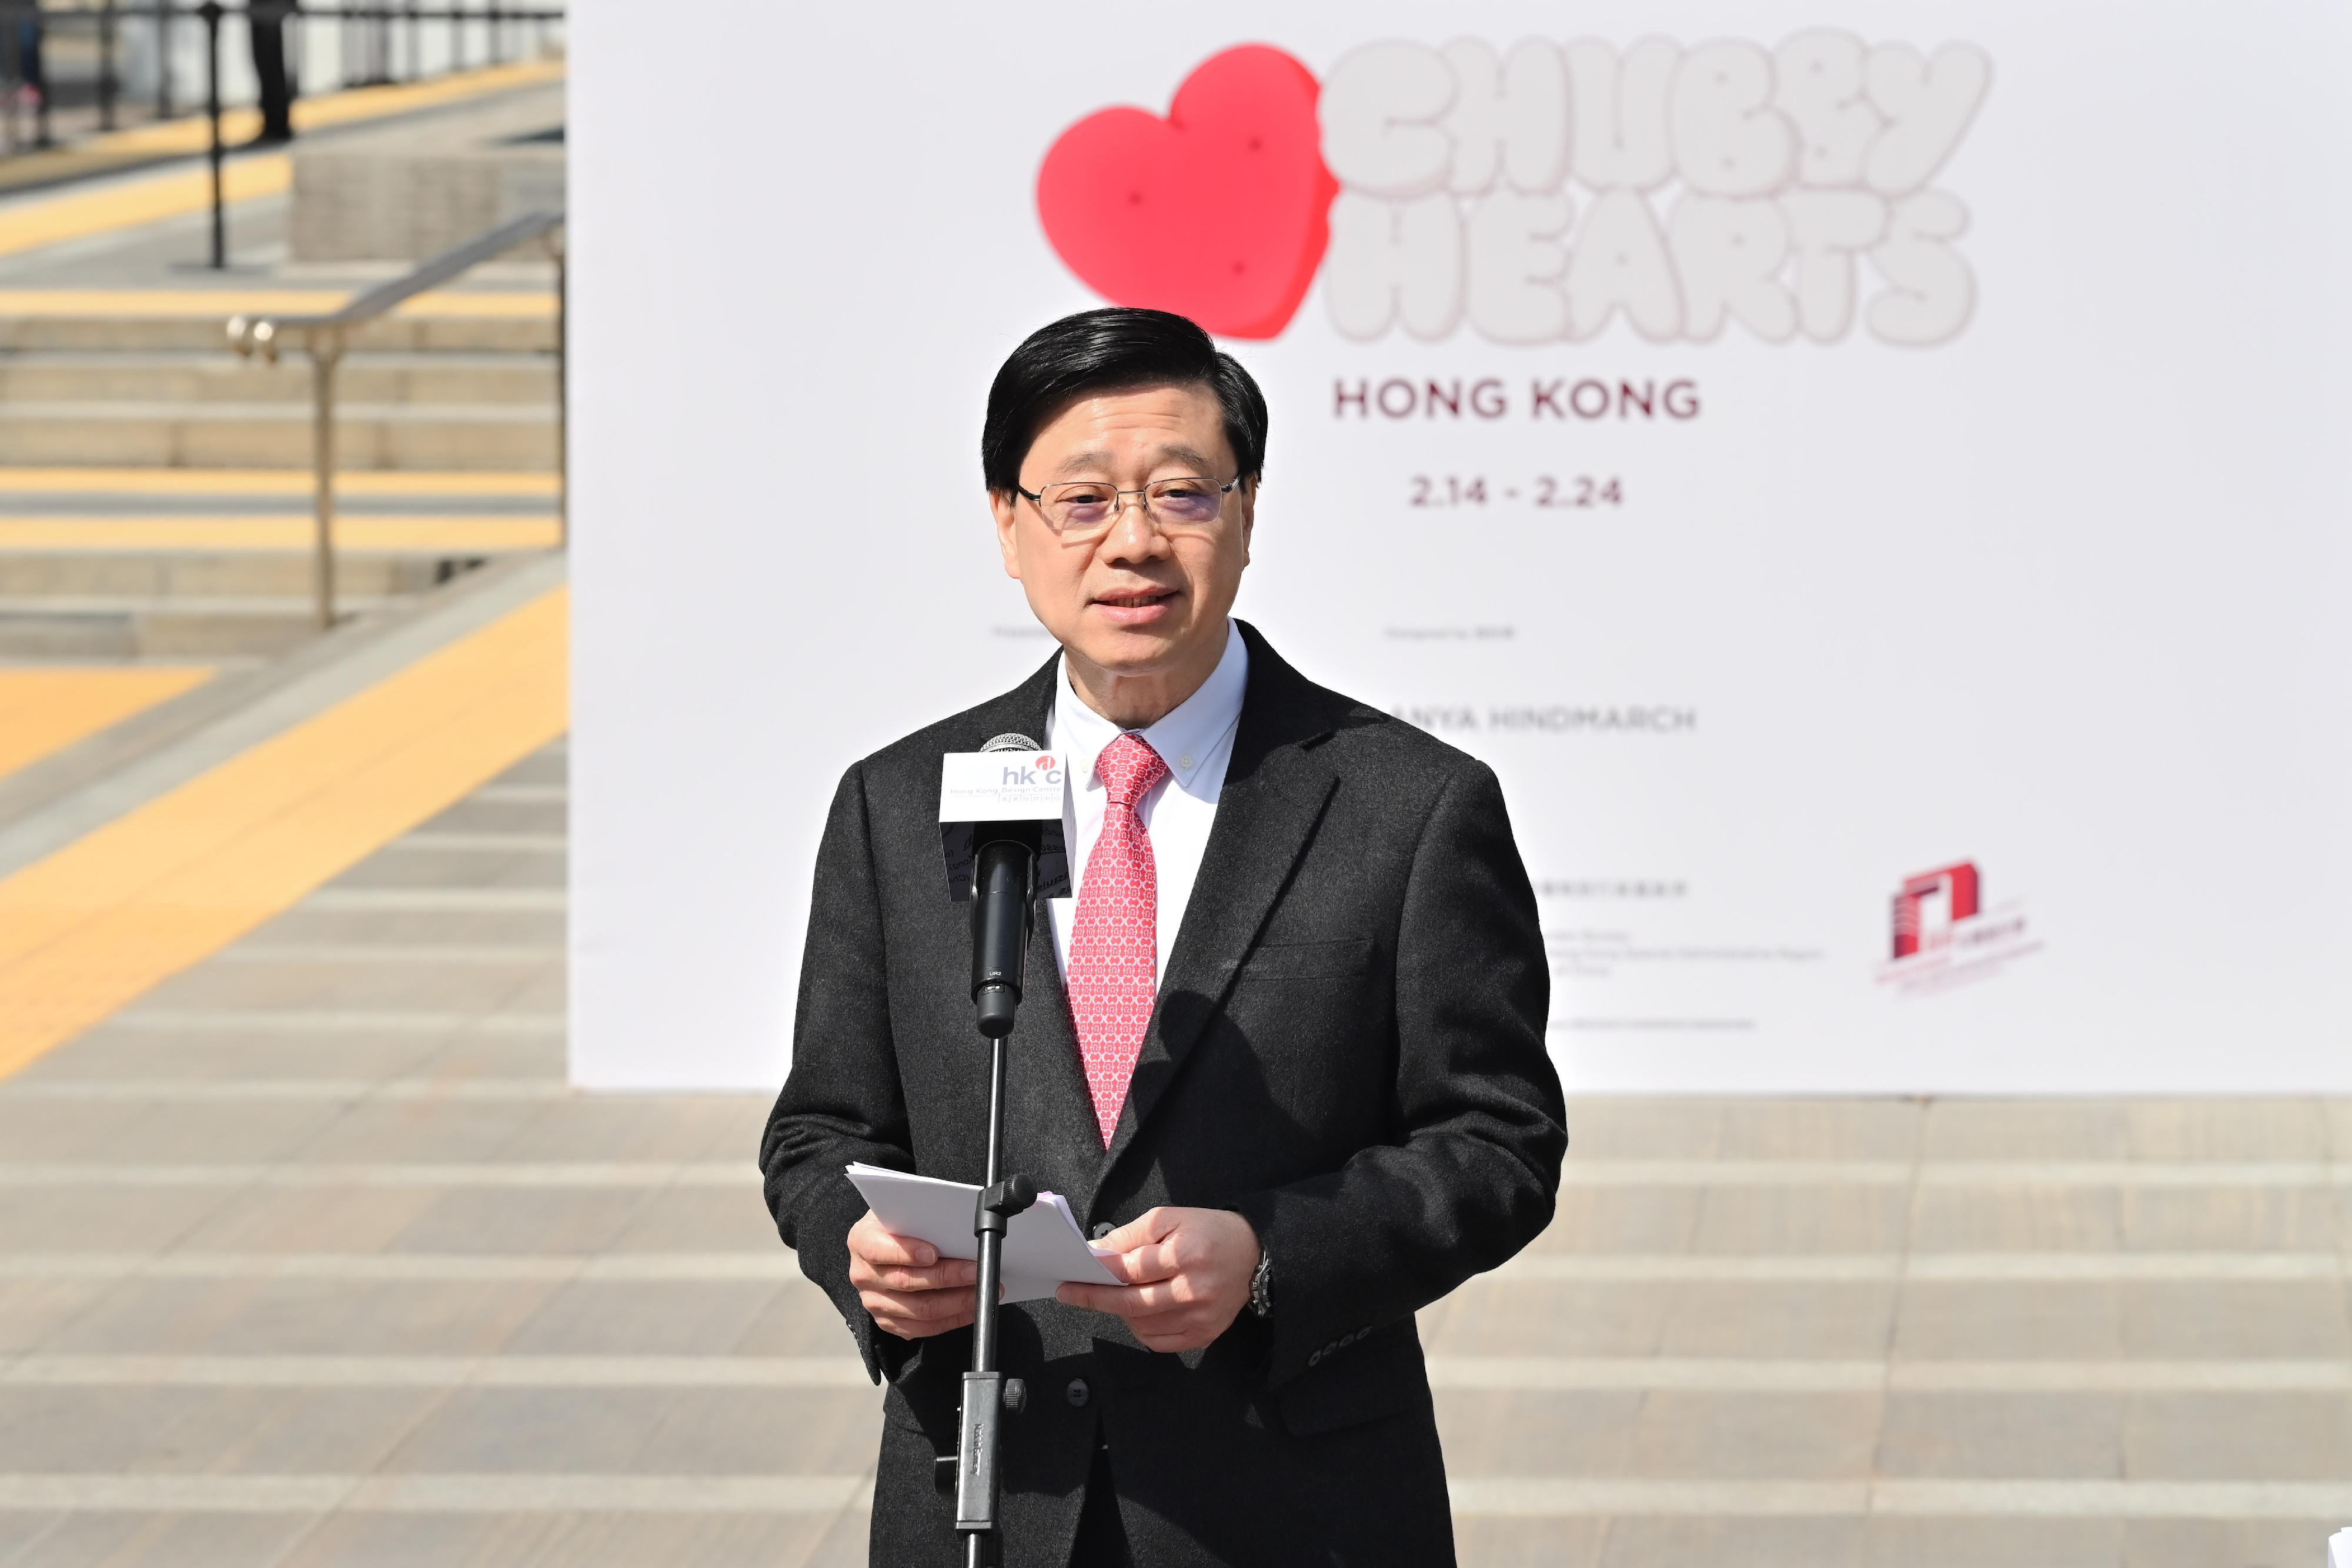 The Chief Executive, Mr John Lee, speaks at Chubby Hearts Hong Kong Launch Event today (February 14).
